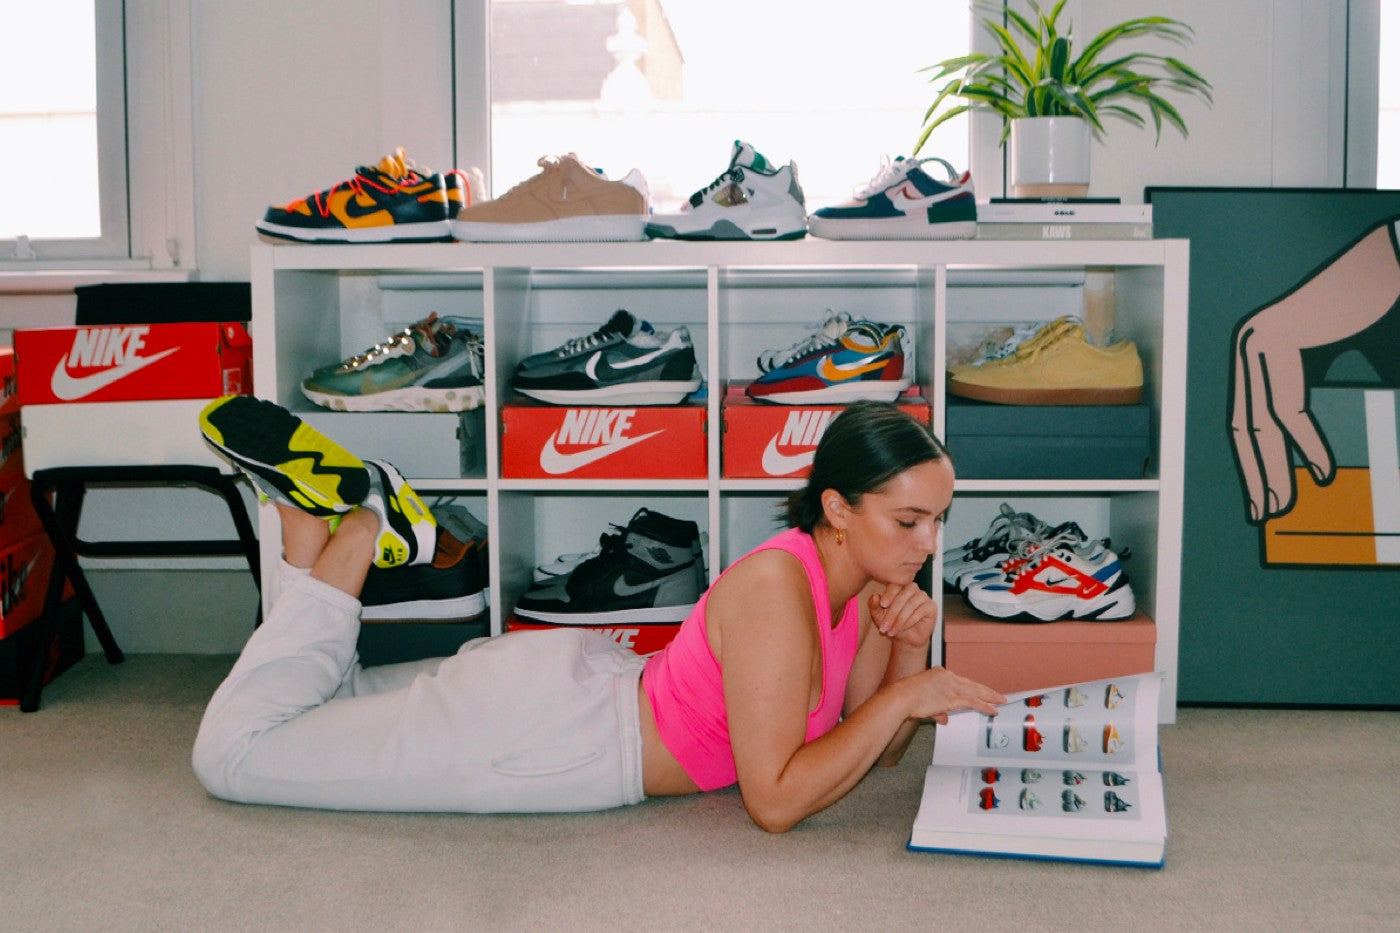 Her Edit LDN: Titi Finlay & Her Experiences Working in the Sneaker Industry